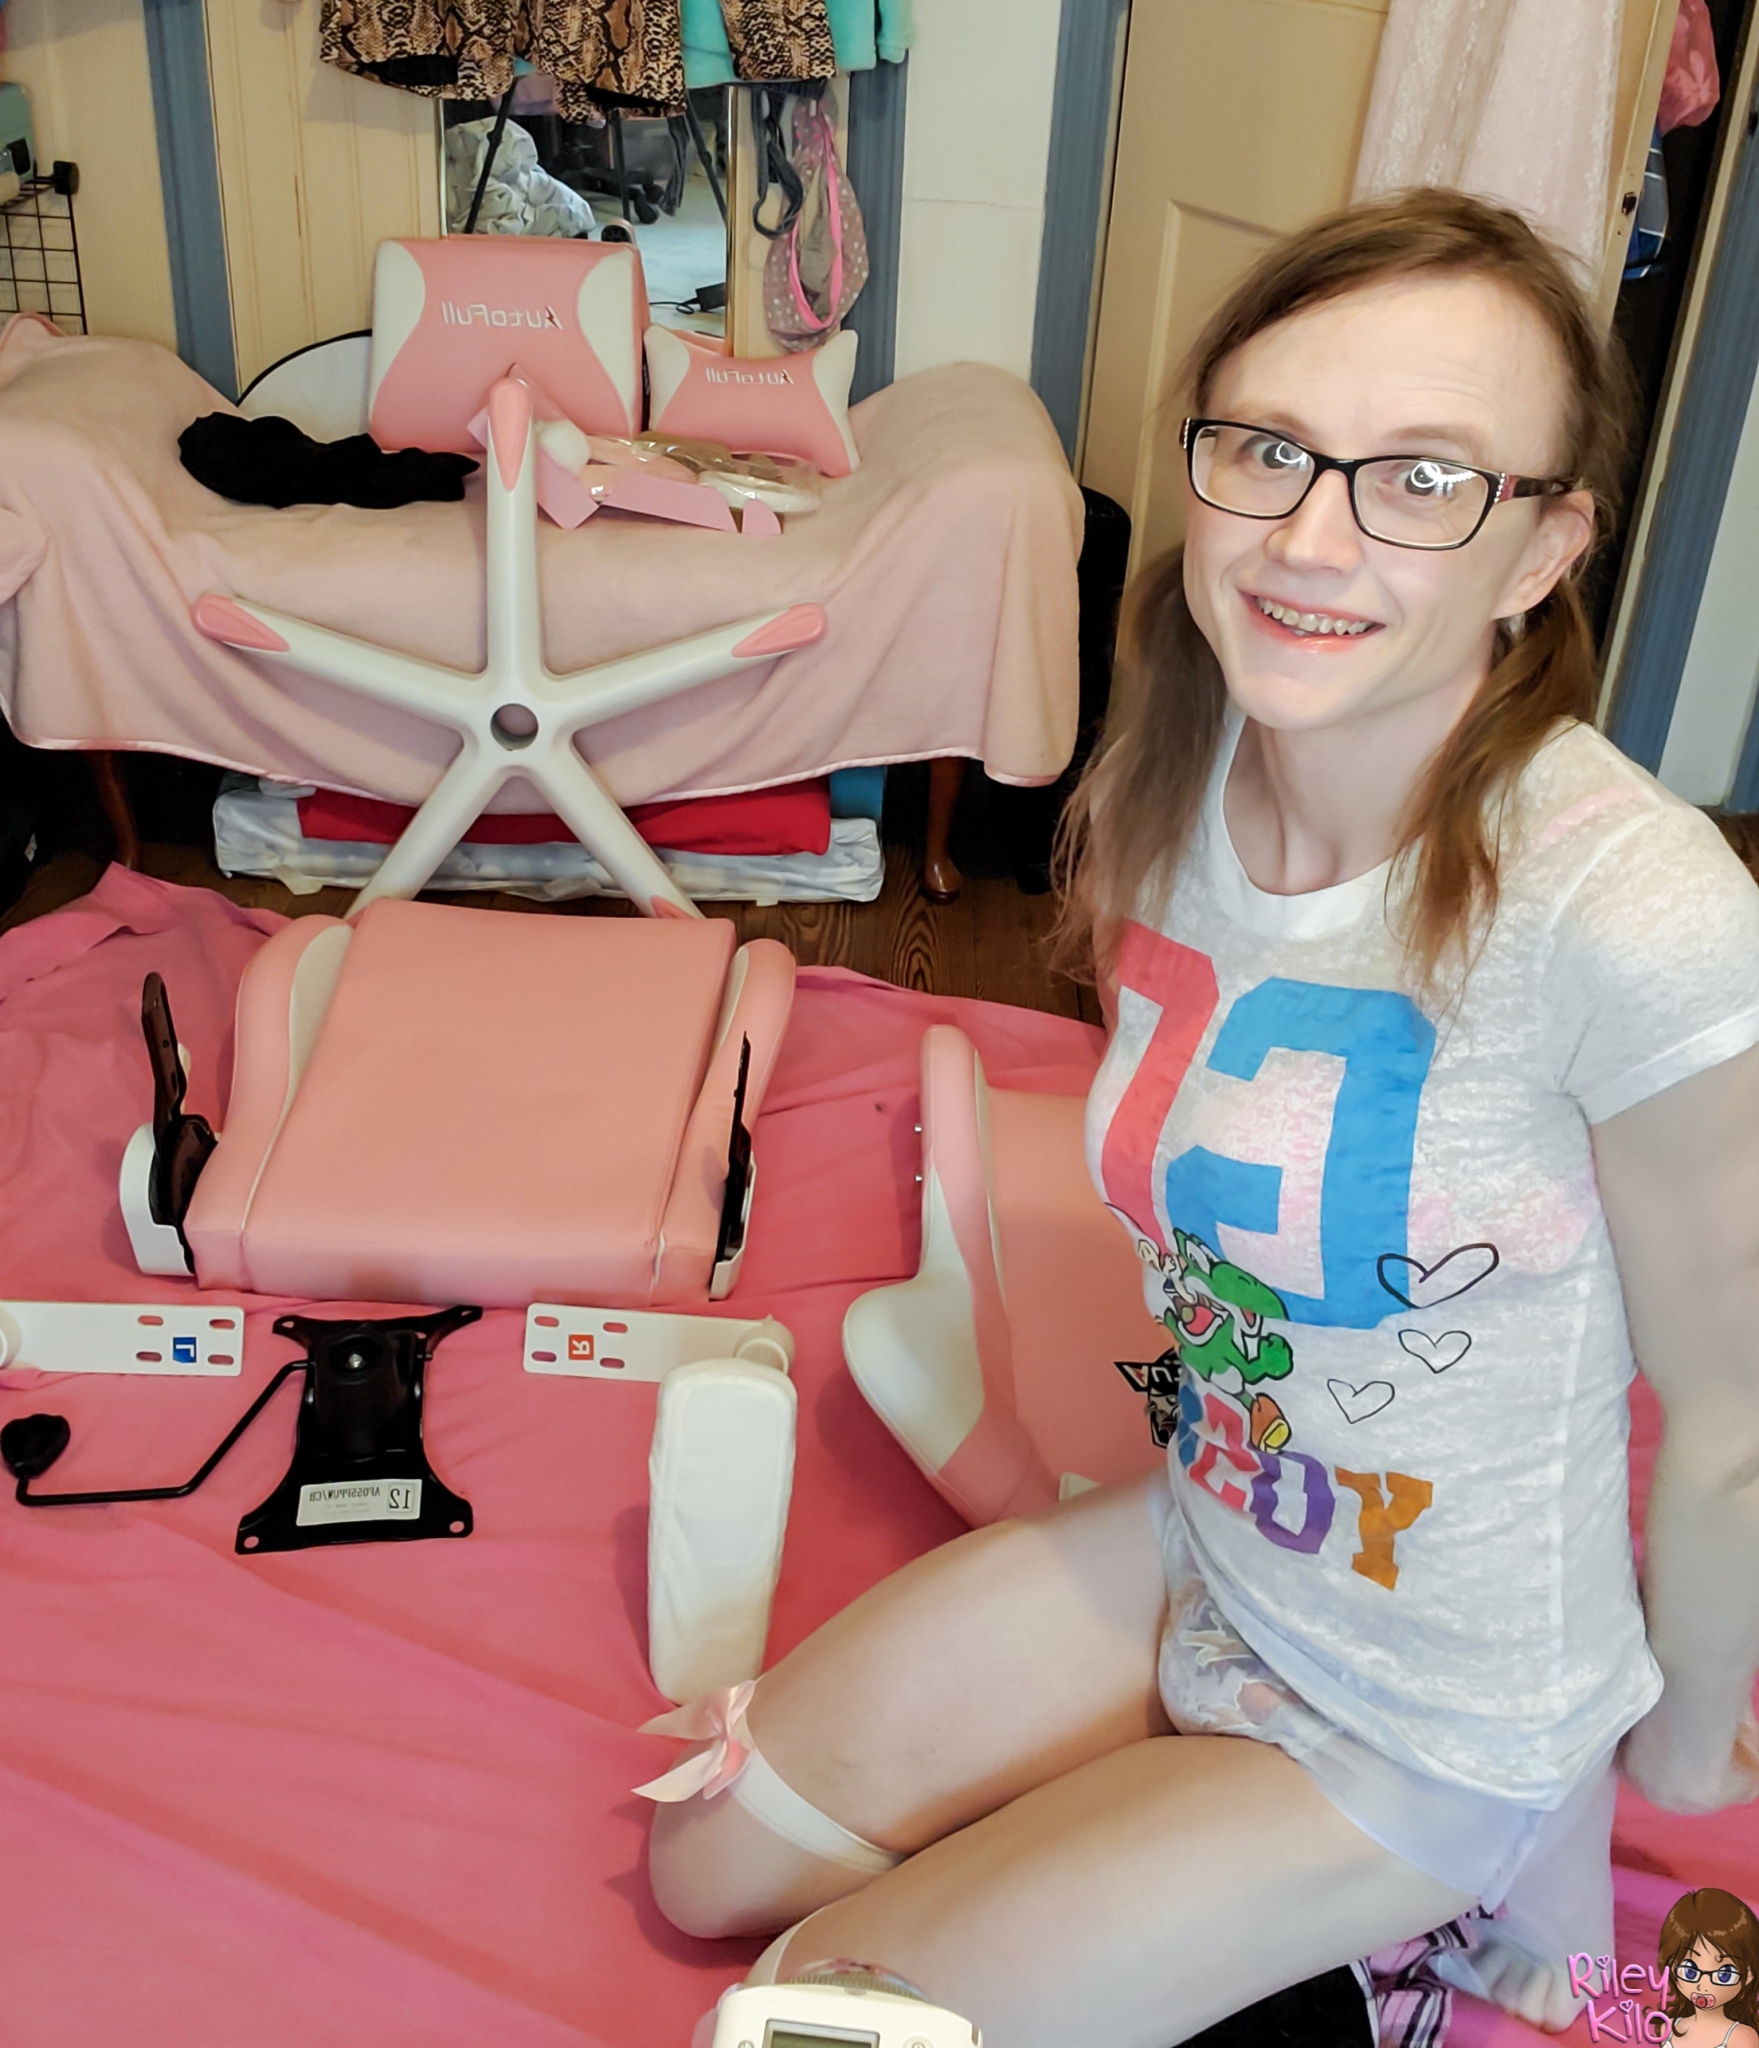 DiaperGirl Builds A Gaming Chair! 